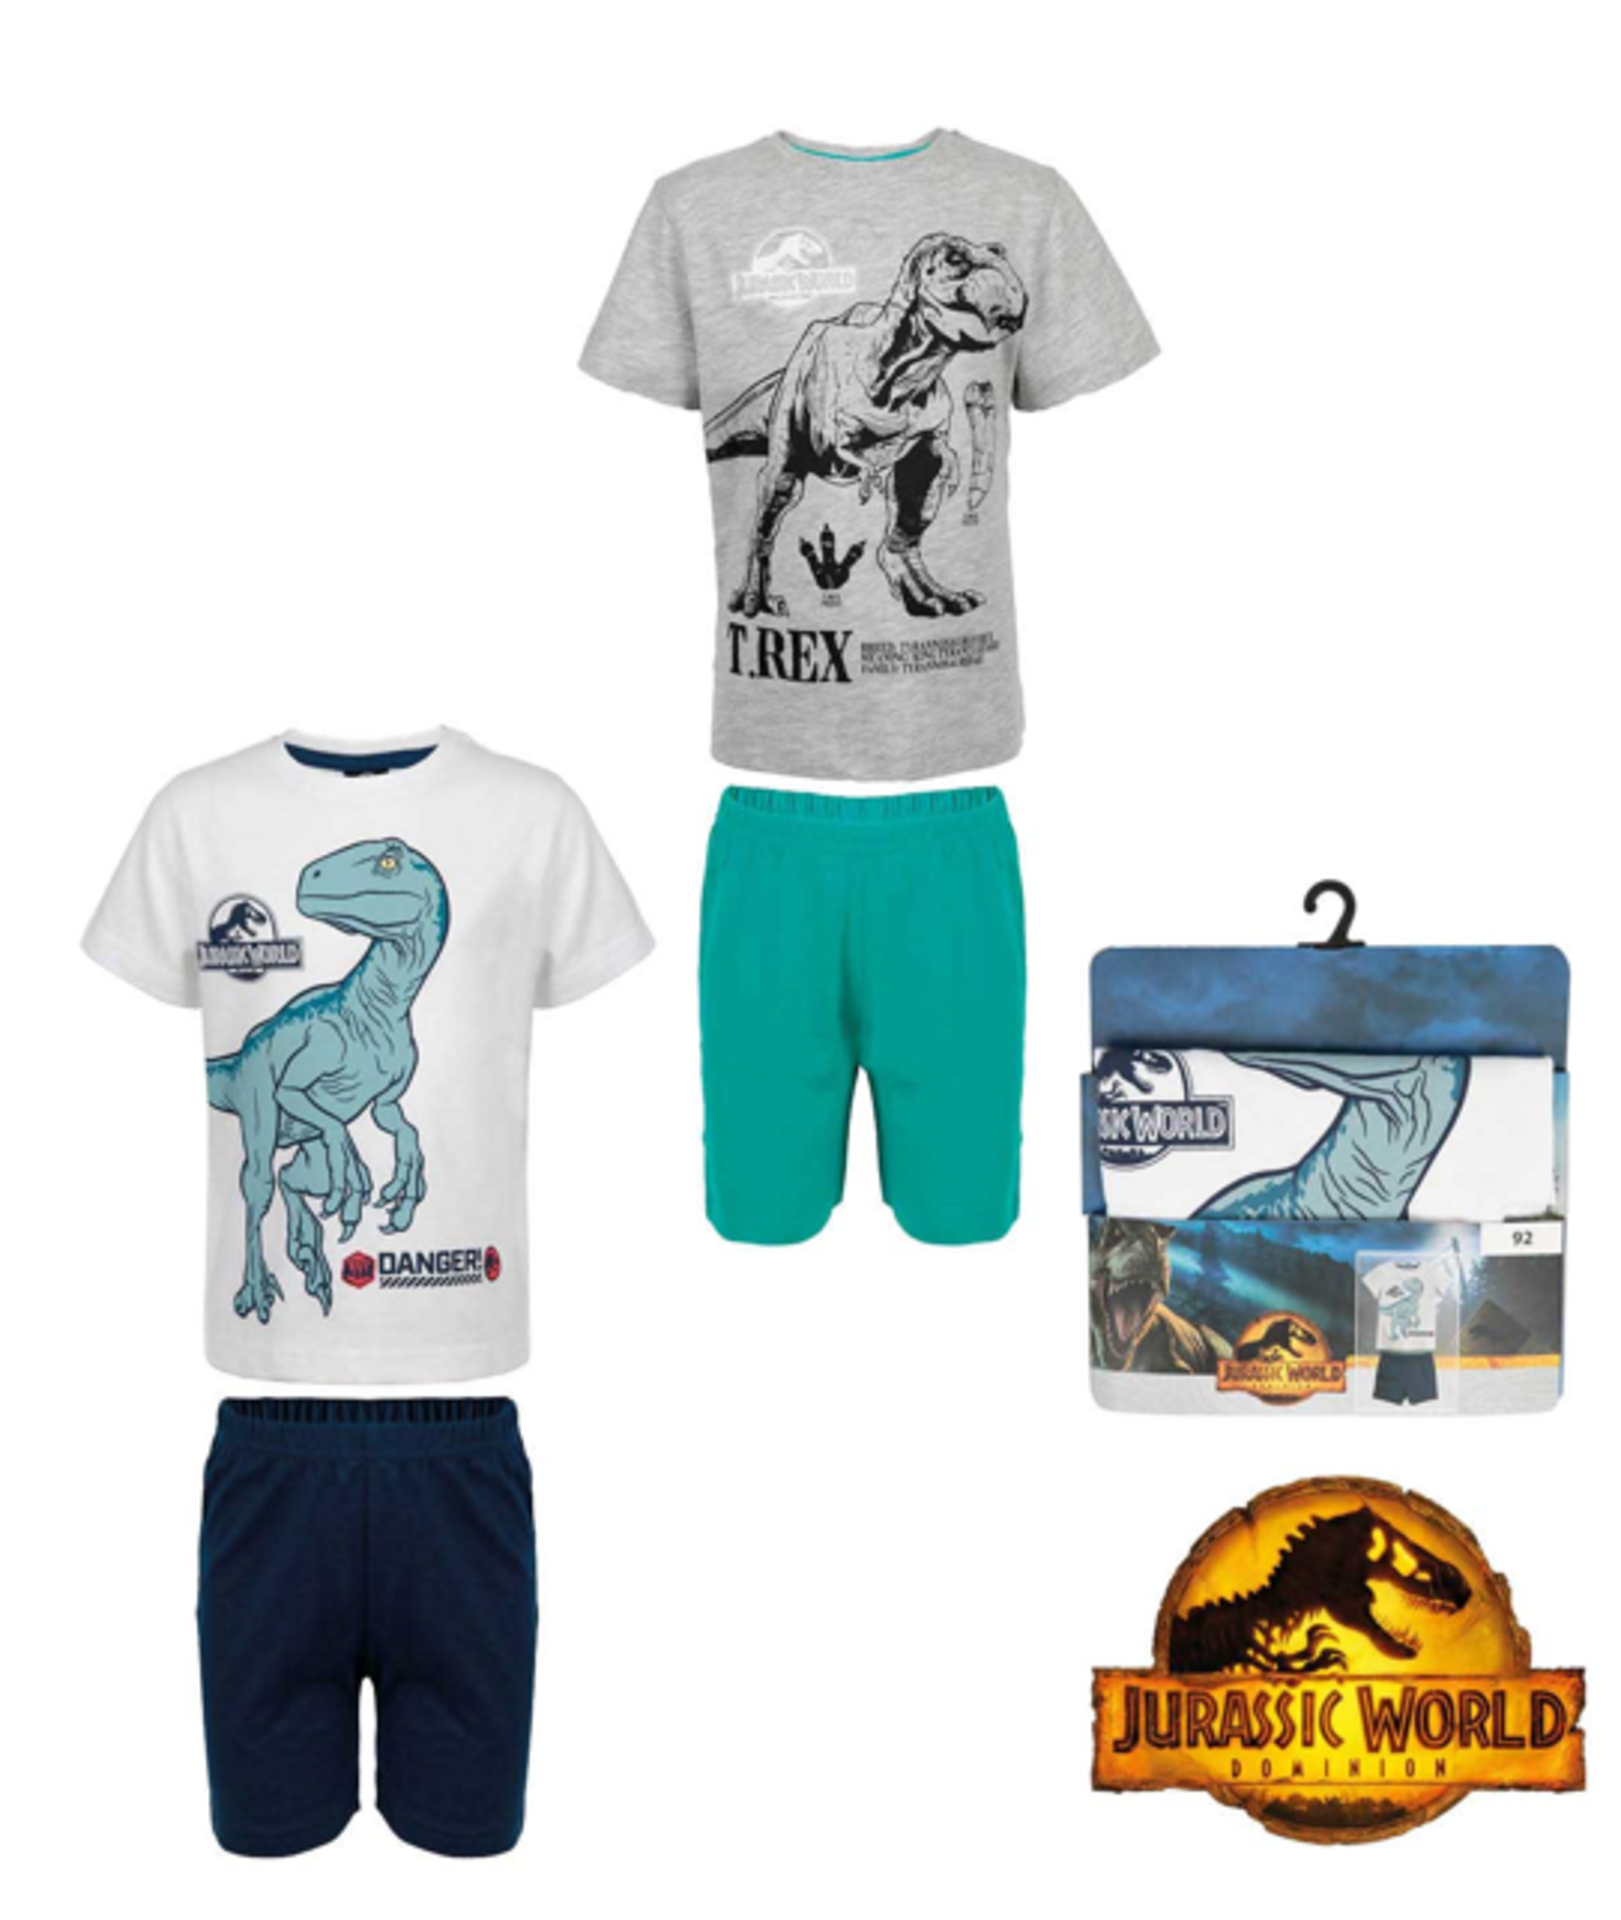 24 x New & Packaged Official Licenced Jurassic World Dominion Pajamas. In 2 Assorted Colours. - Image 2 of 2